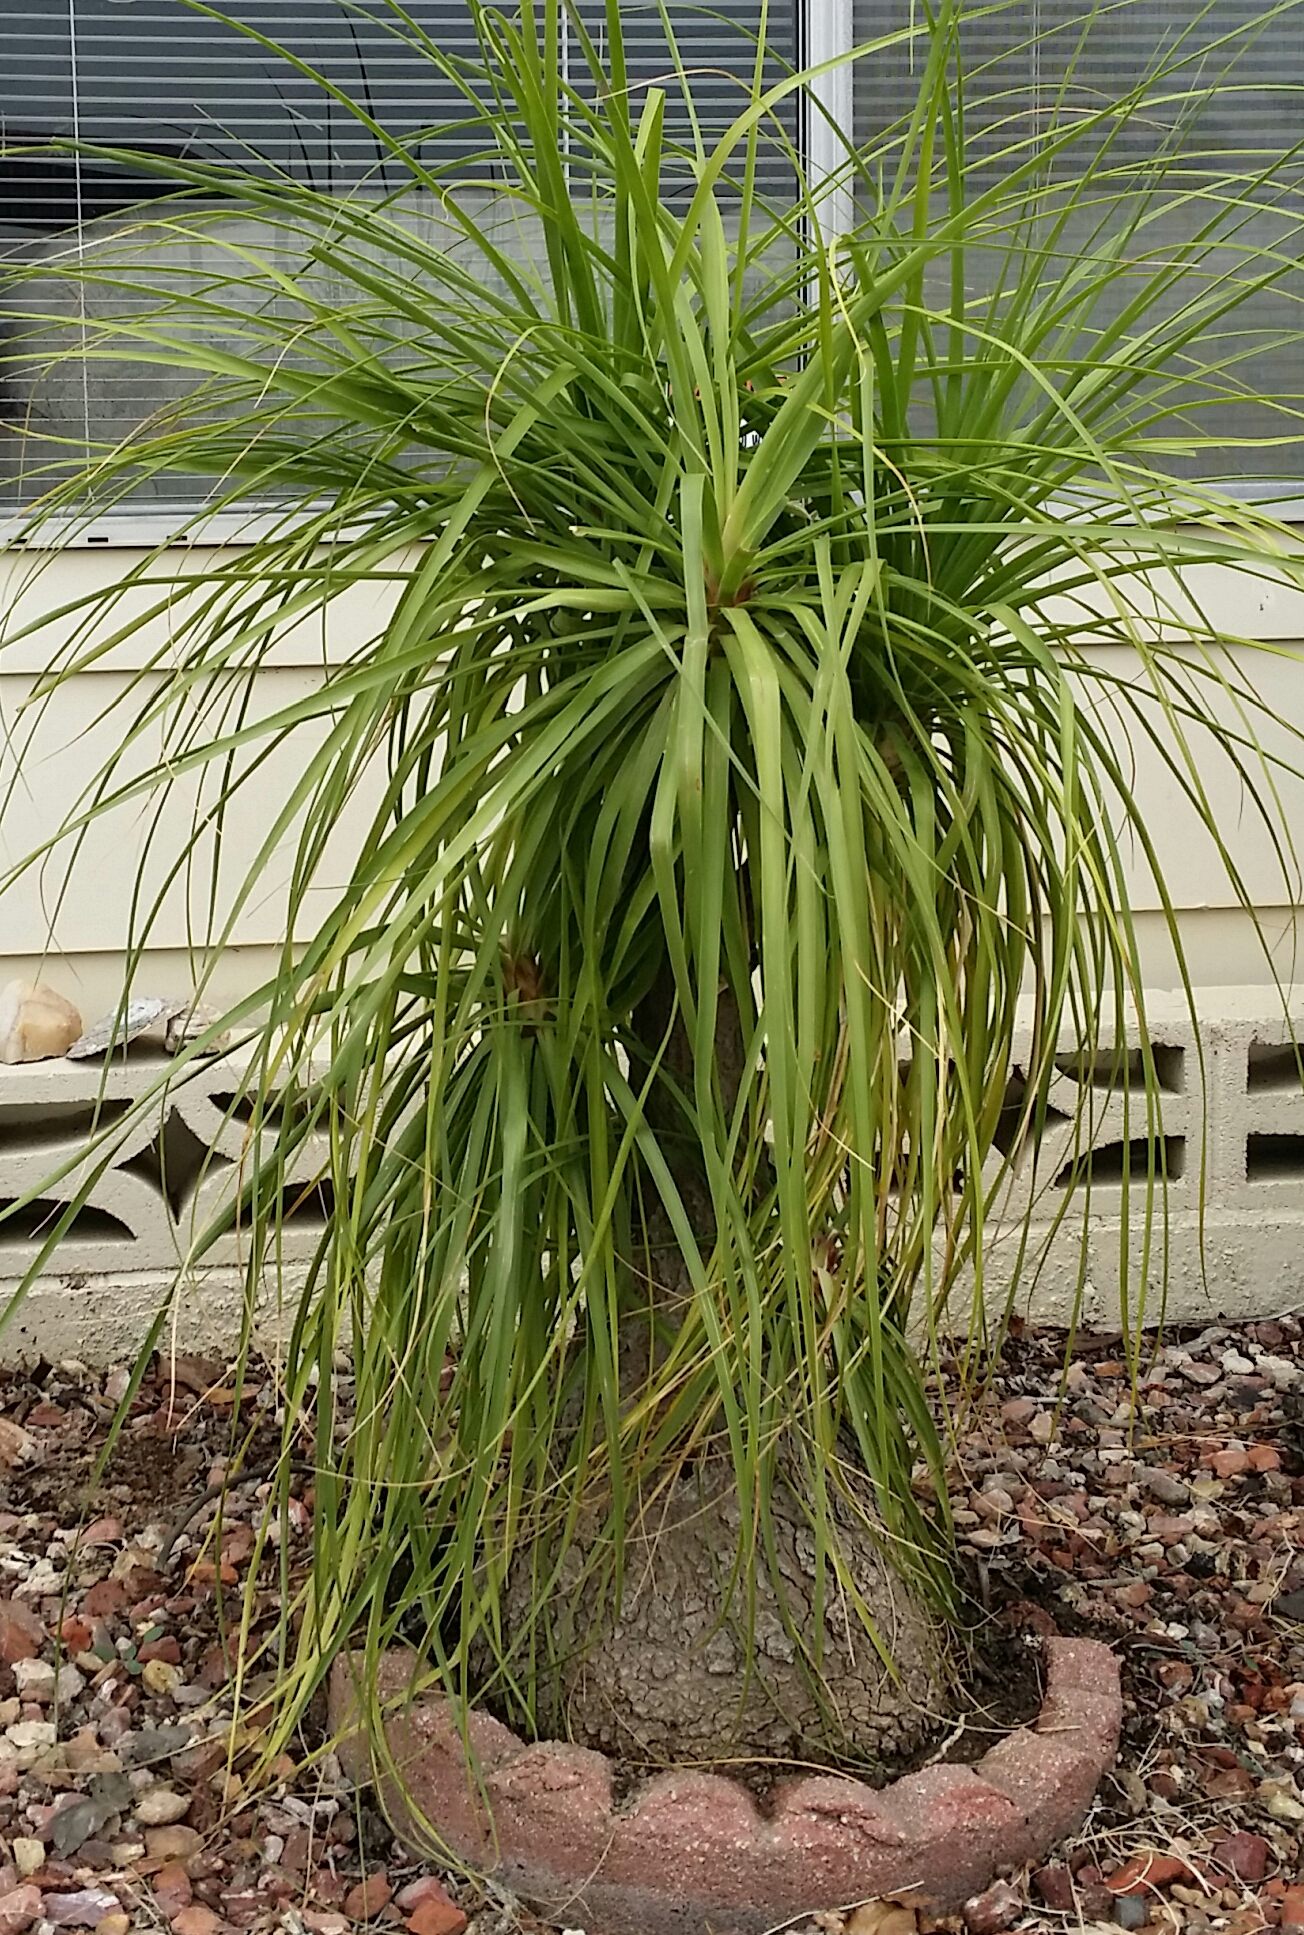 Beaucarnea recuvata is not a palm or even a tree, despite the name.